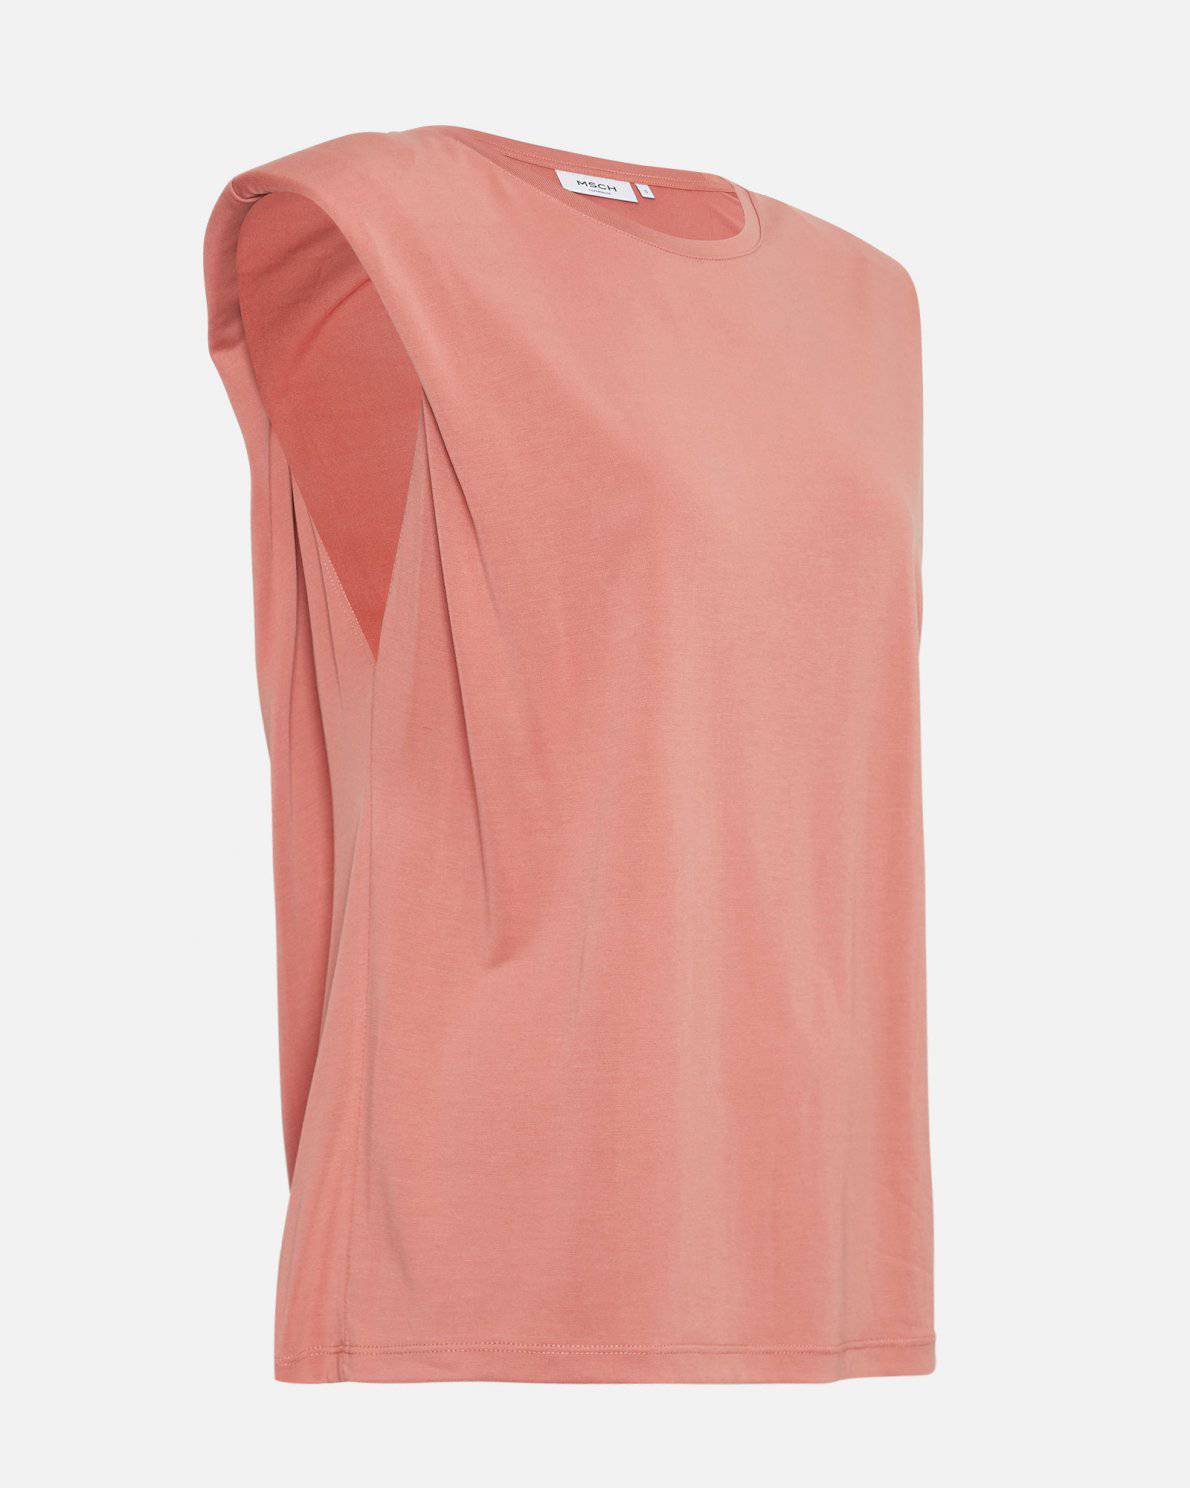 Moss Copenhagen Rose Pink / Black Sleeveless Top - Your Style Your Story